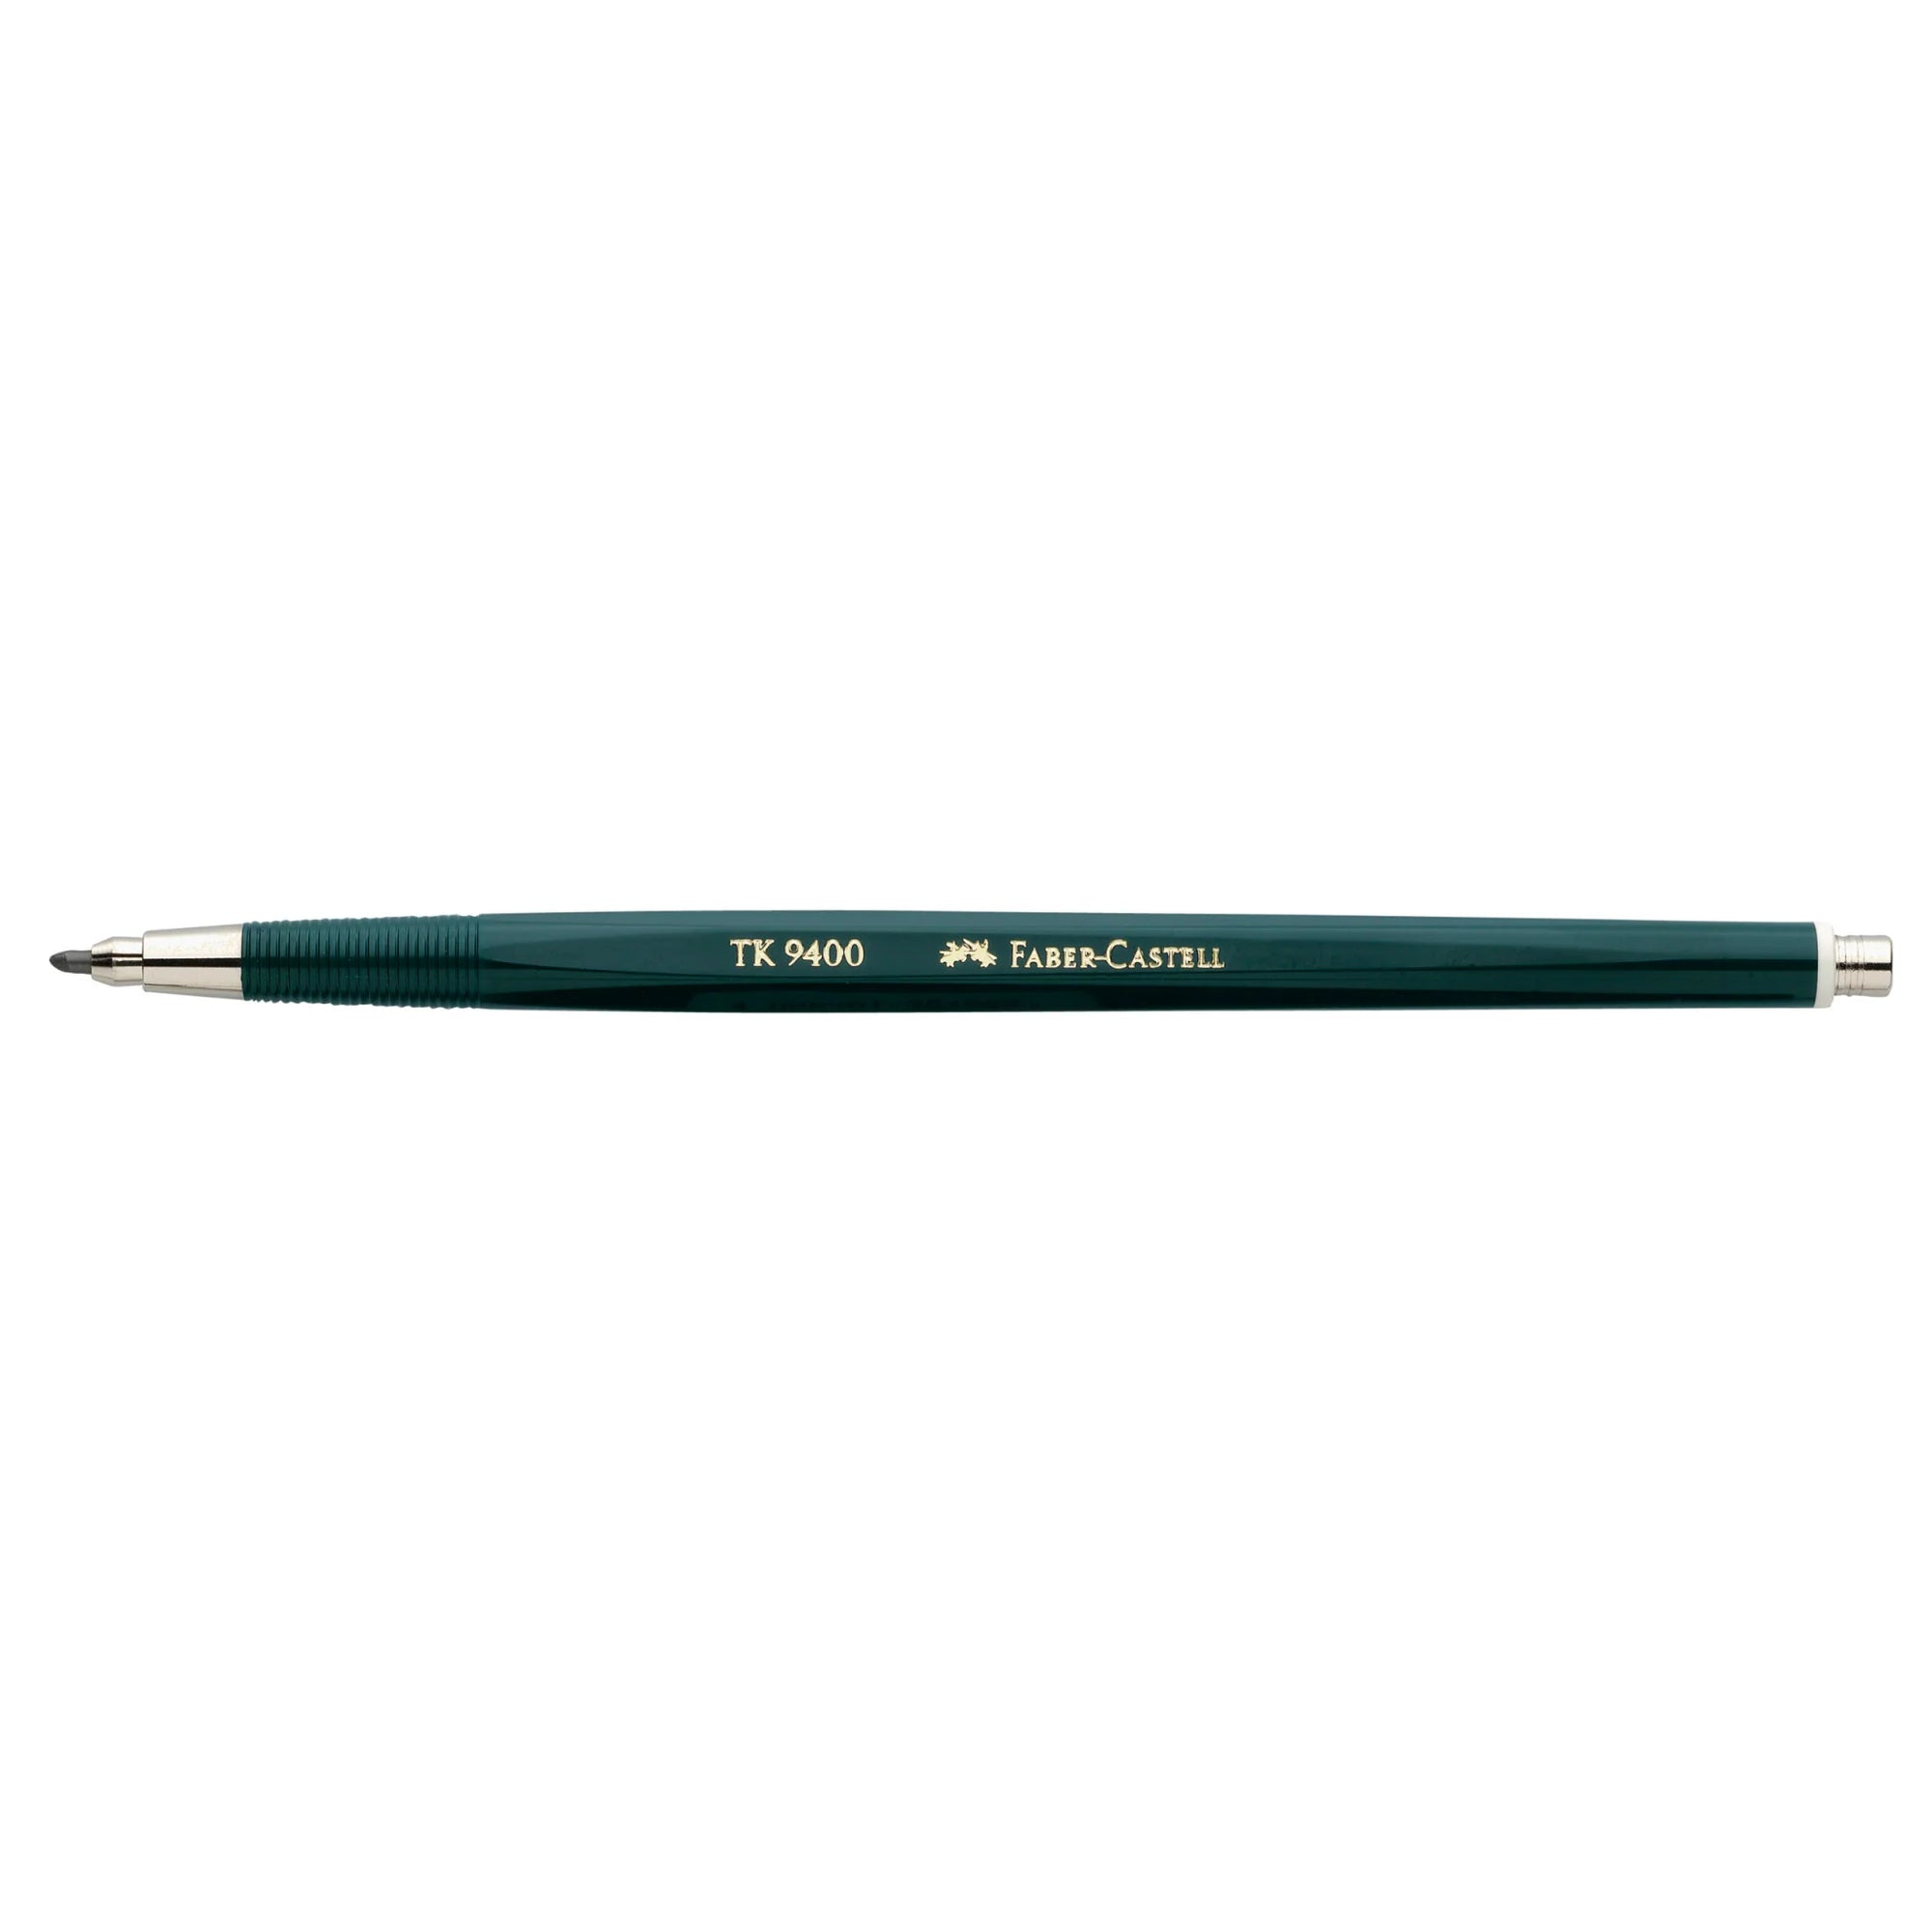 Faber-castell TK 9400 2mm clutch pencil HB (No Marking) - Blesket Canada